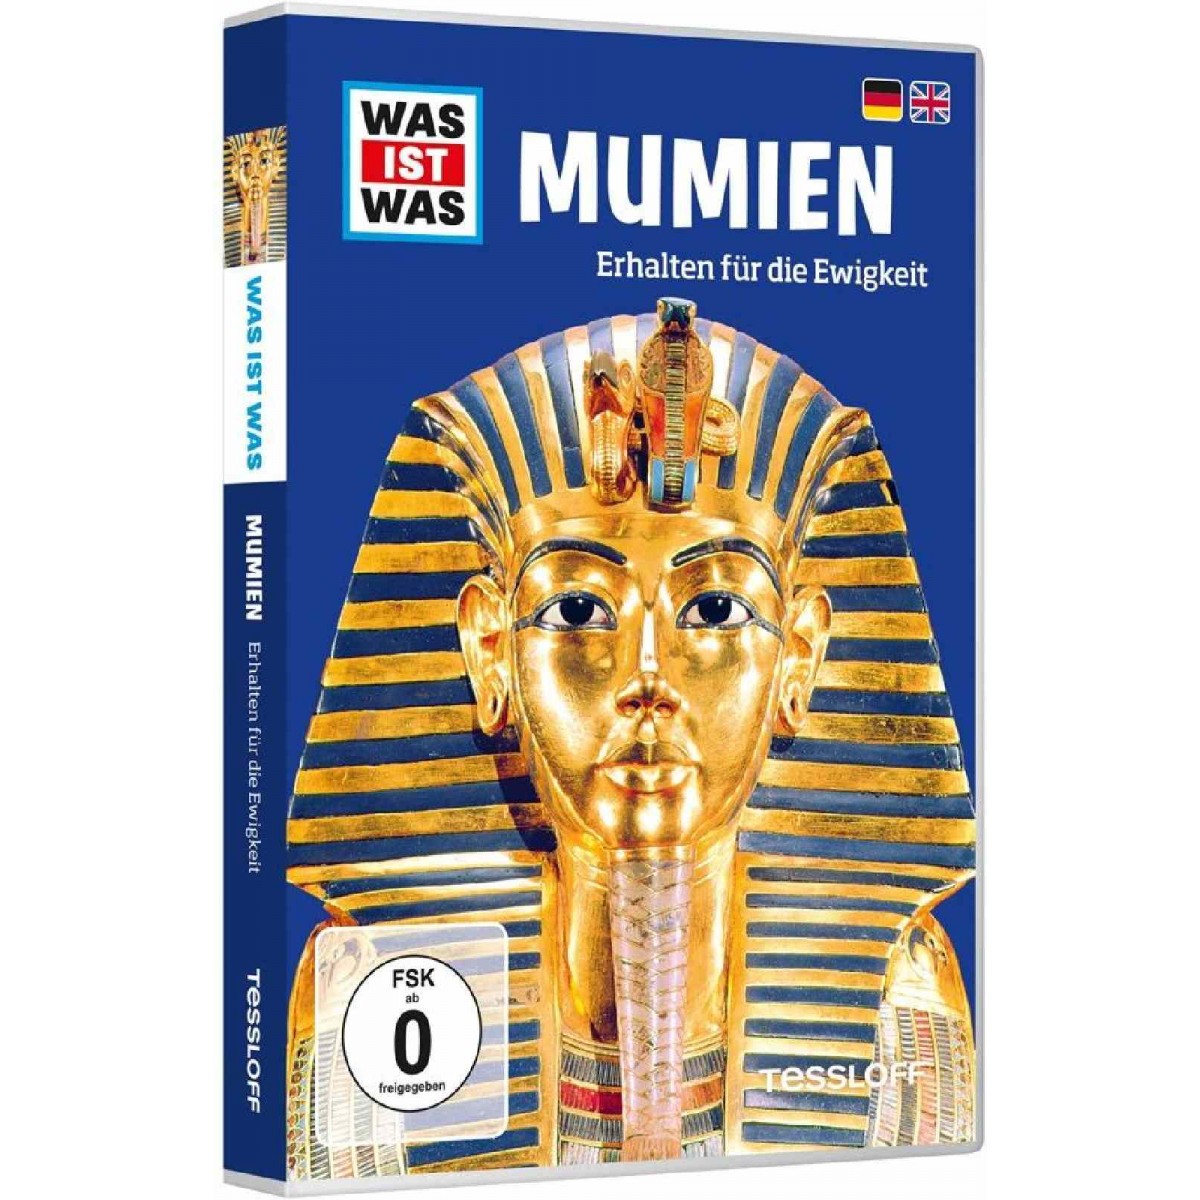 Universal Pictures - Was ist Was DVD - Mumien